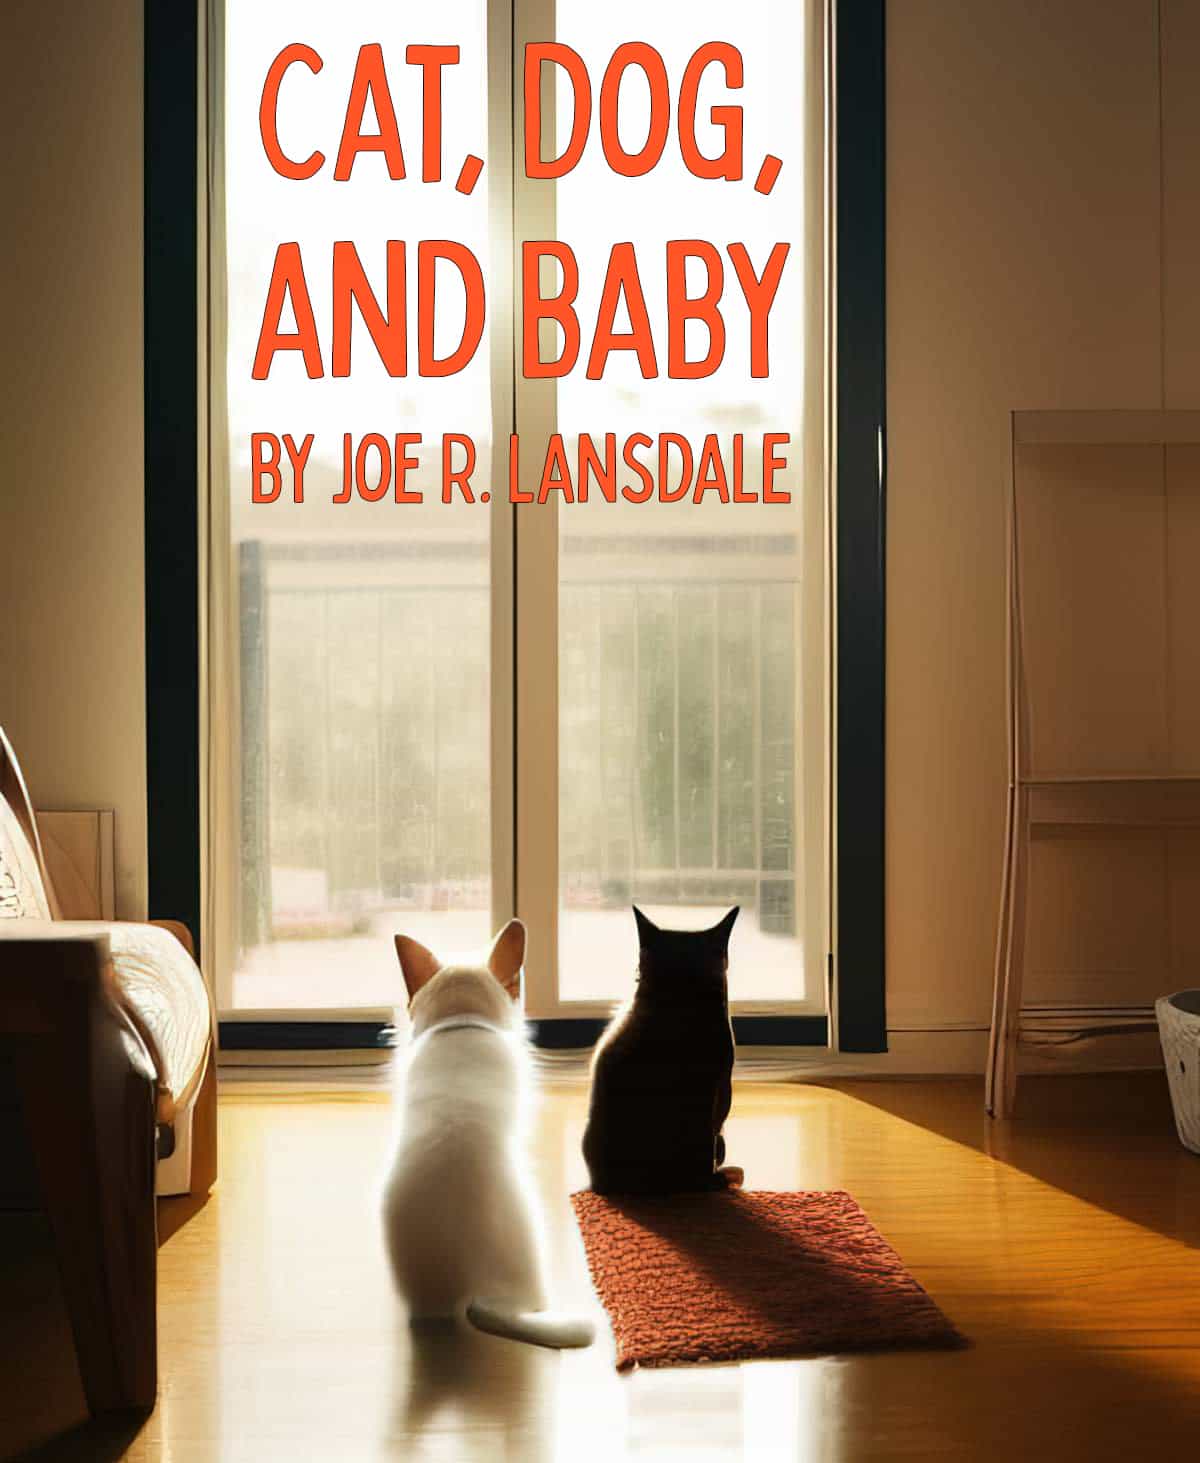 Dog, Cat and Baby by Joe R. Lansdale